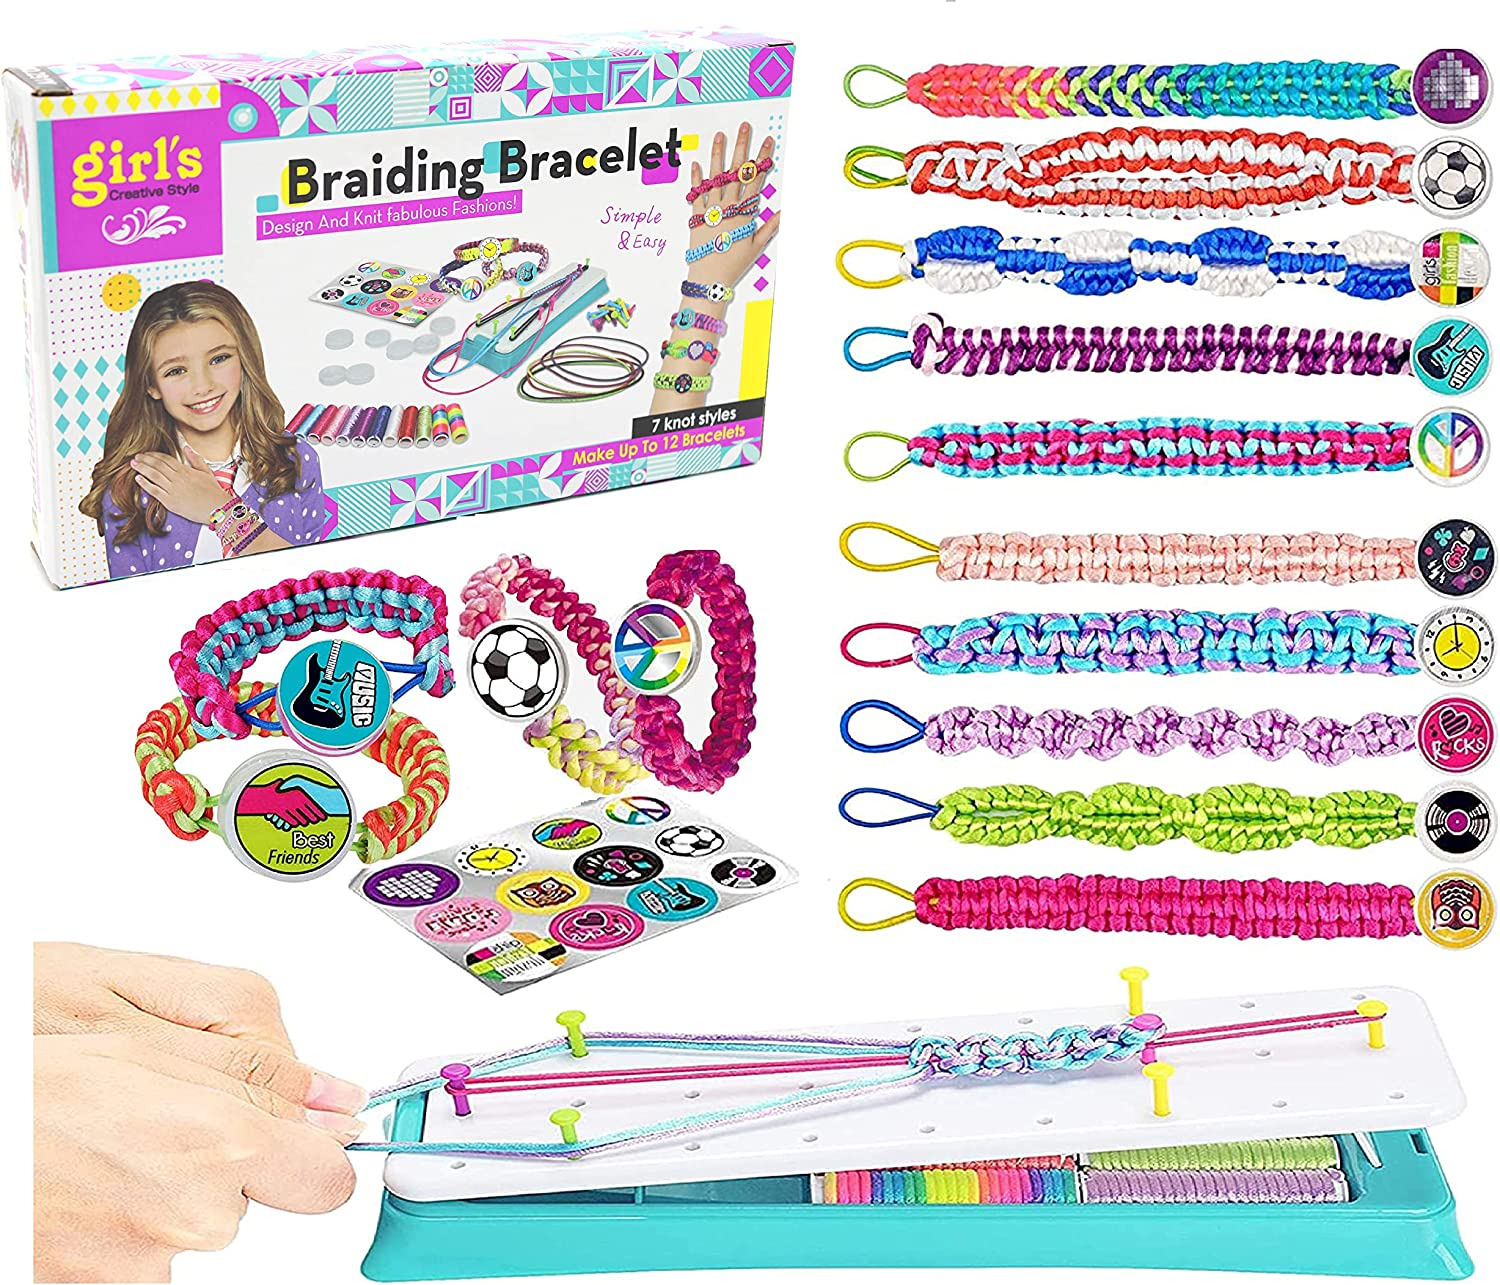 Friendship Bracelet Making Kit For Girls,diy Jewelry Arts Craft Gifts Toys,trave